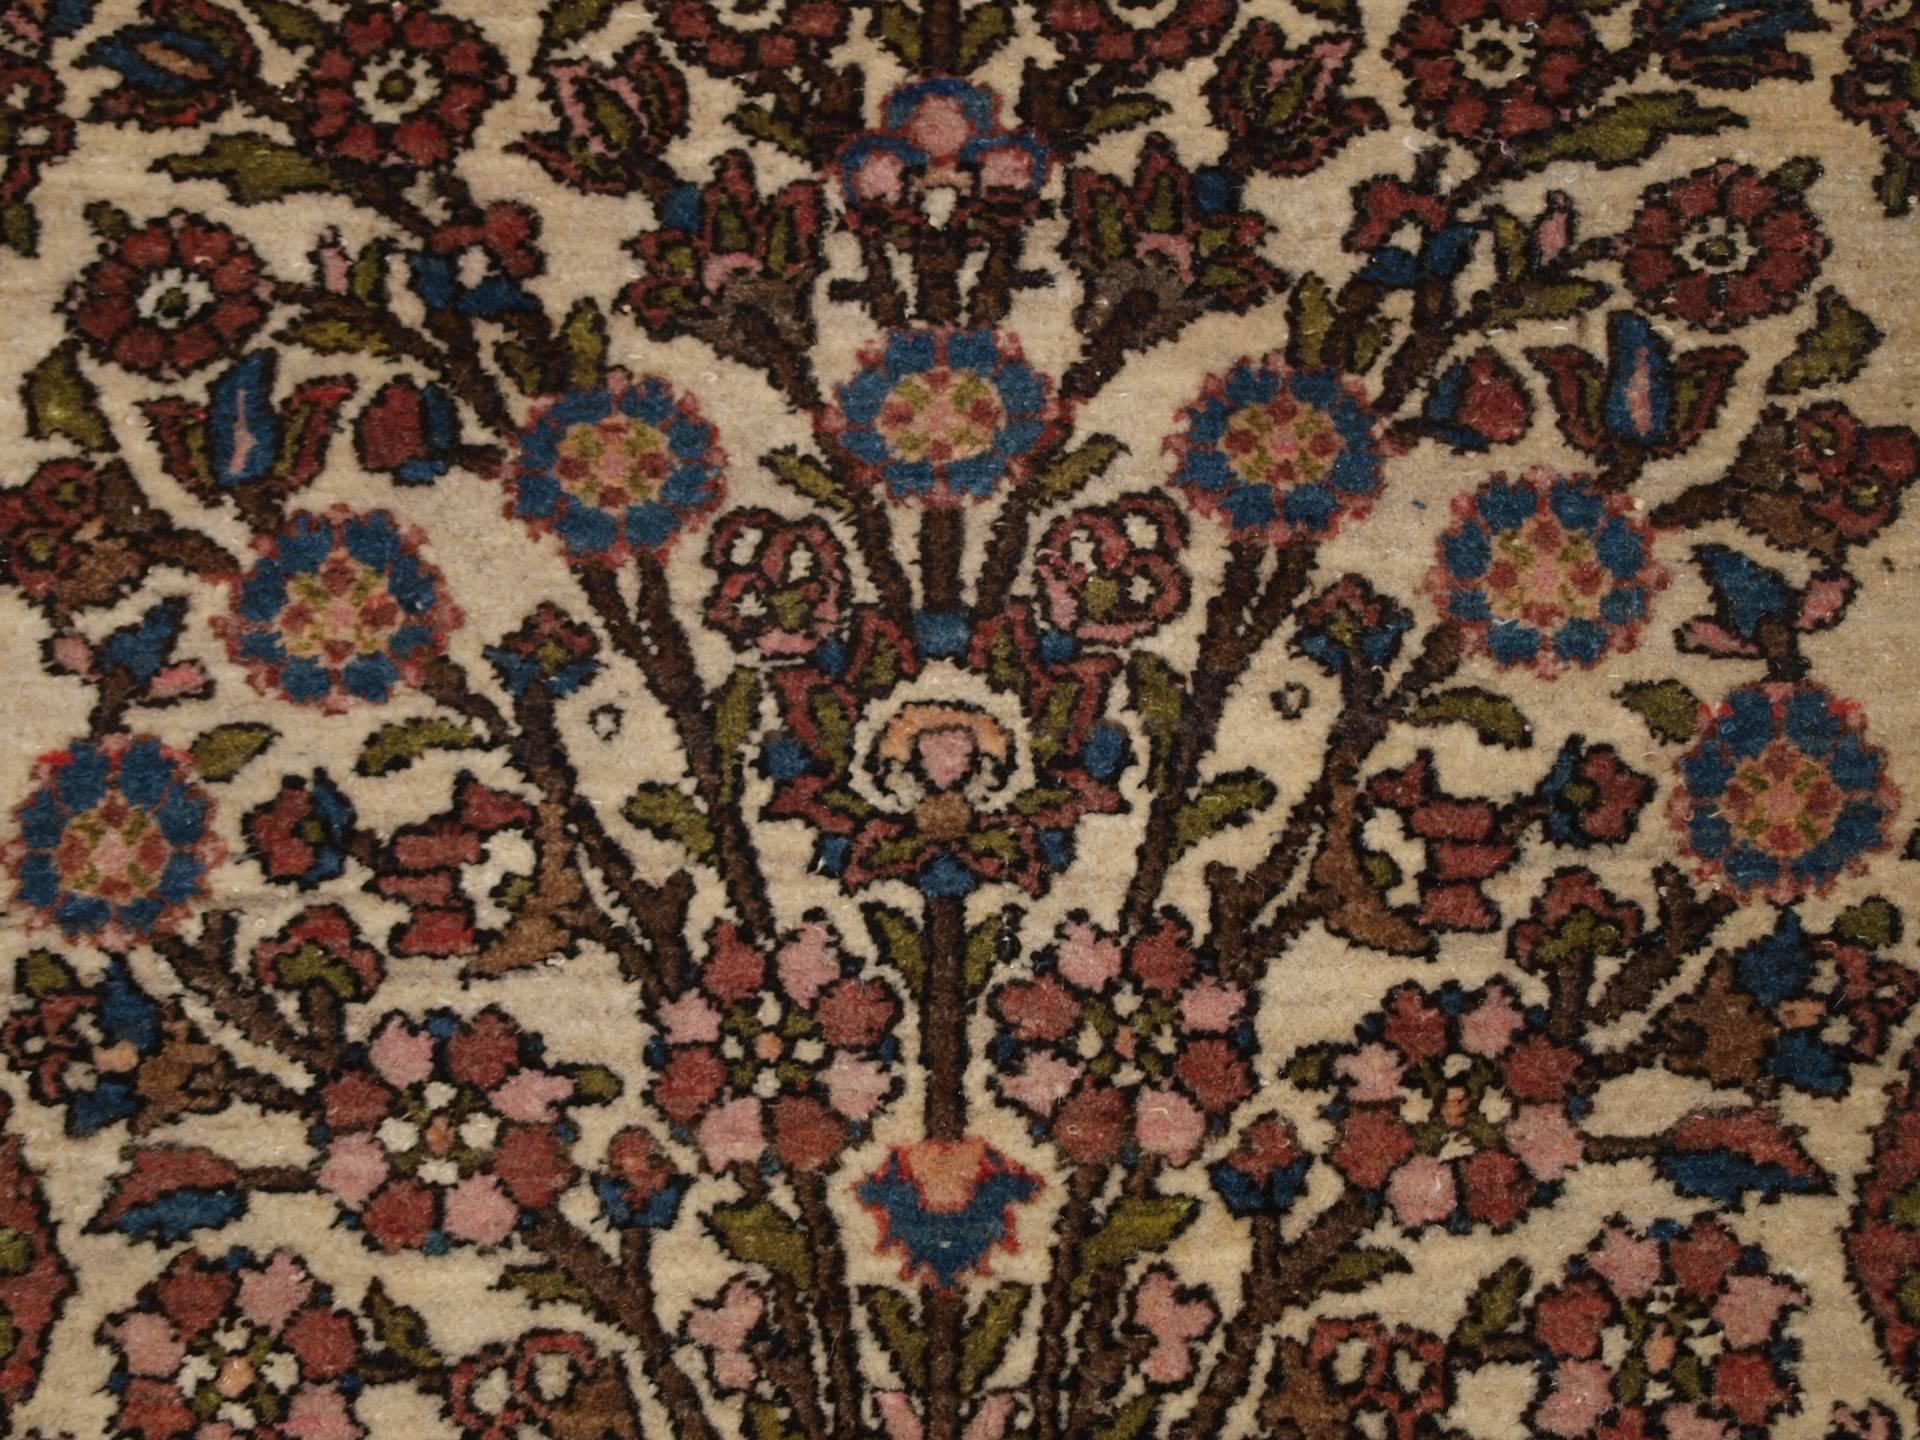 Early 20th Century Isfahan Prayer Rug with a Very Traditional Floral Vase Design, circa 1900 For Sale